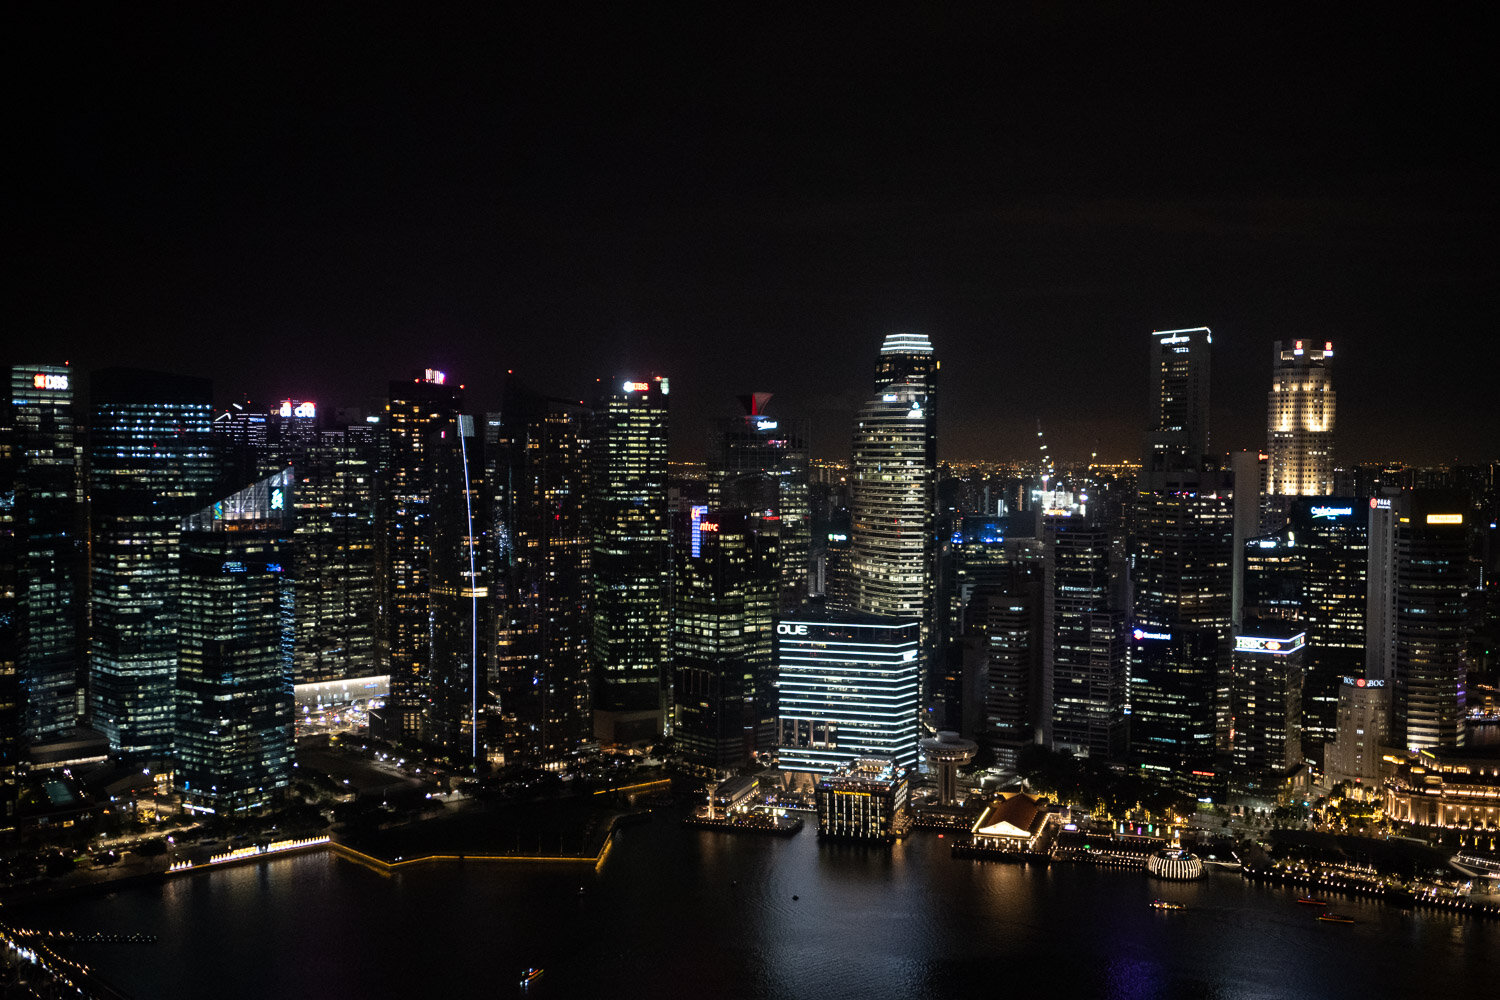 Singapore’s skyline, view from famous Marina Bay Sands Hotel’s rooftop restaurant